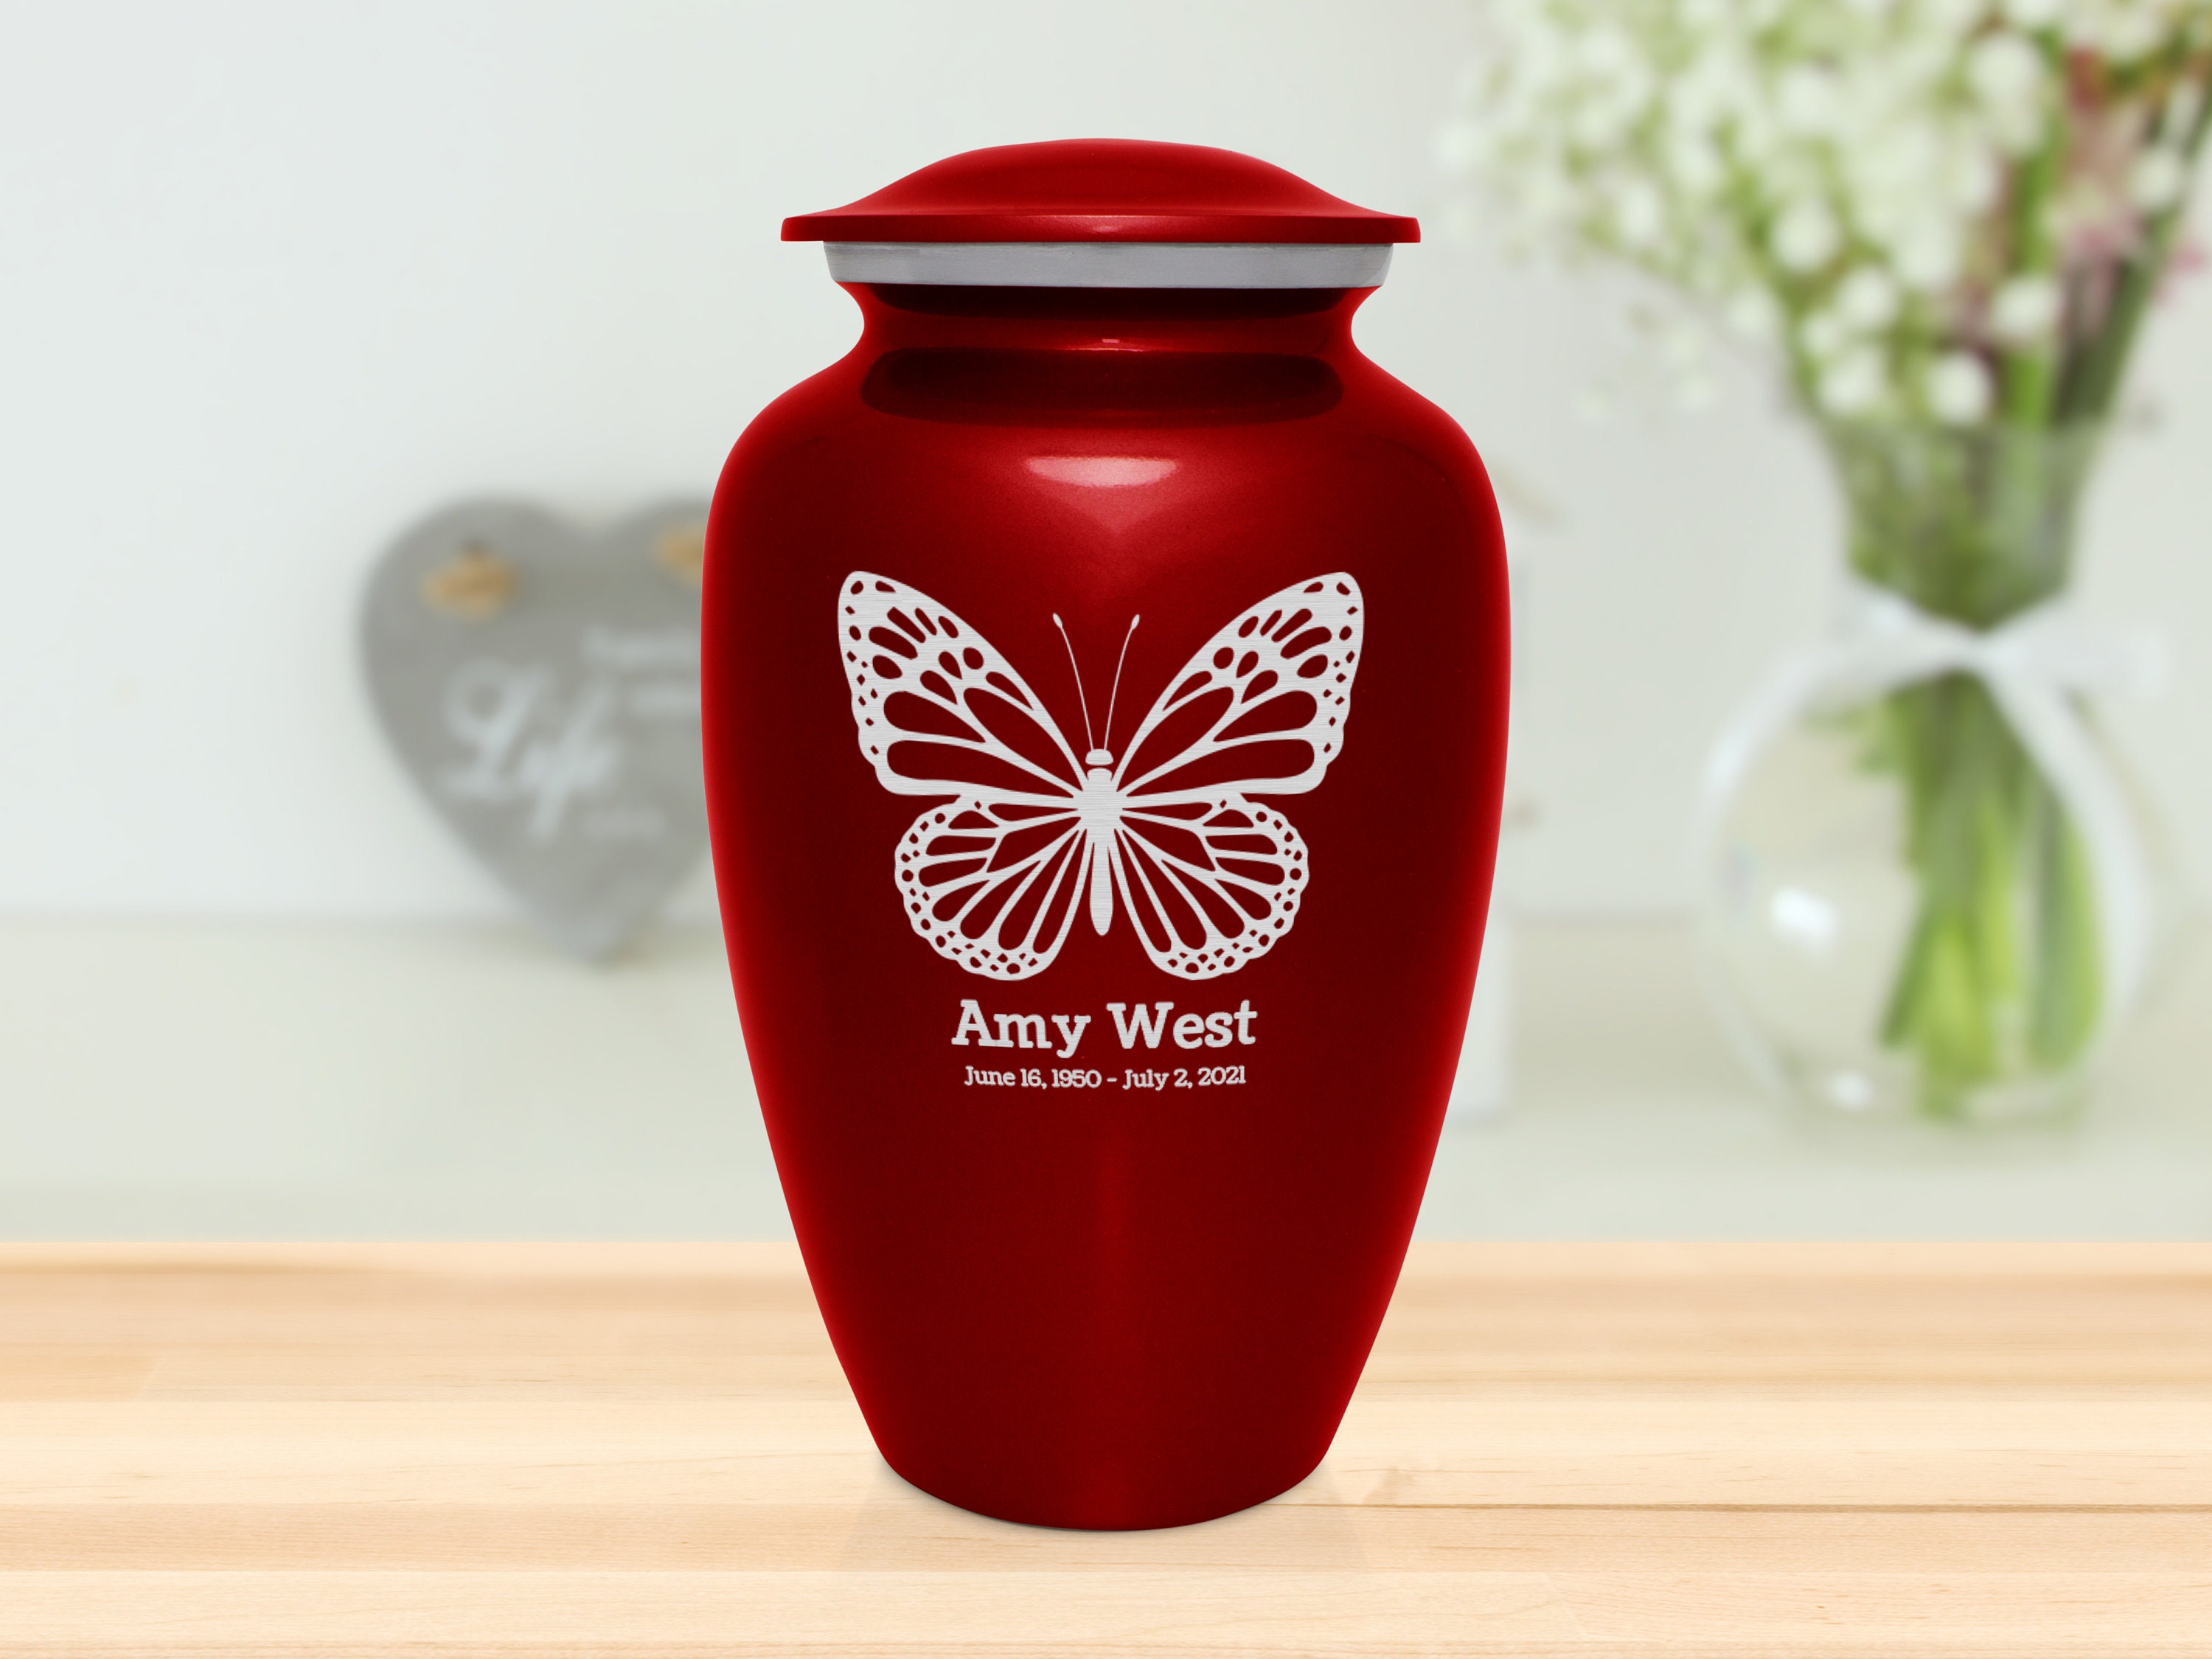 Custom Engraved It's Awfully Dark In Here Classic Cremation Urn